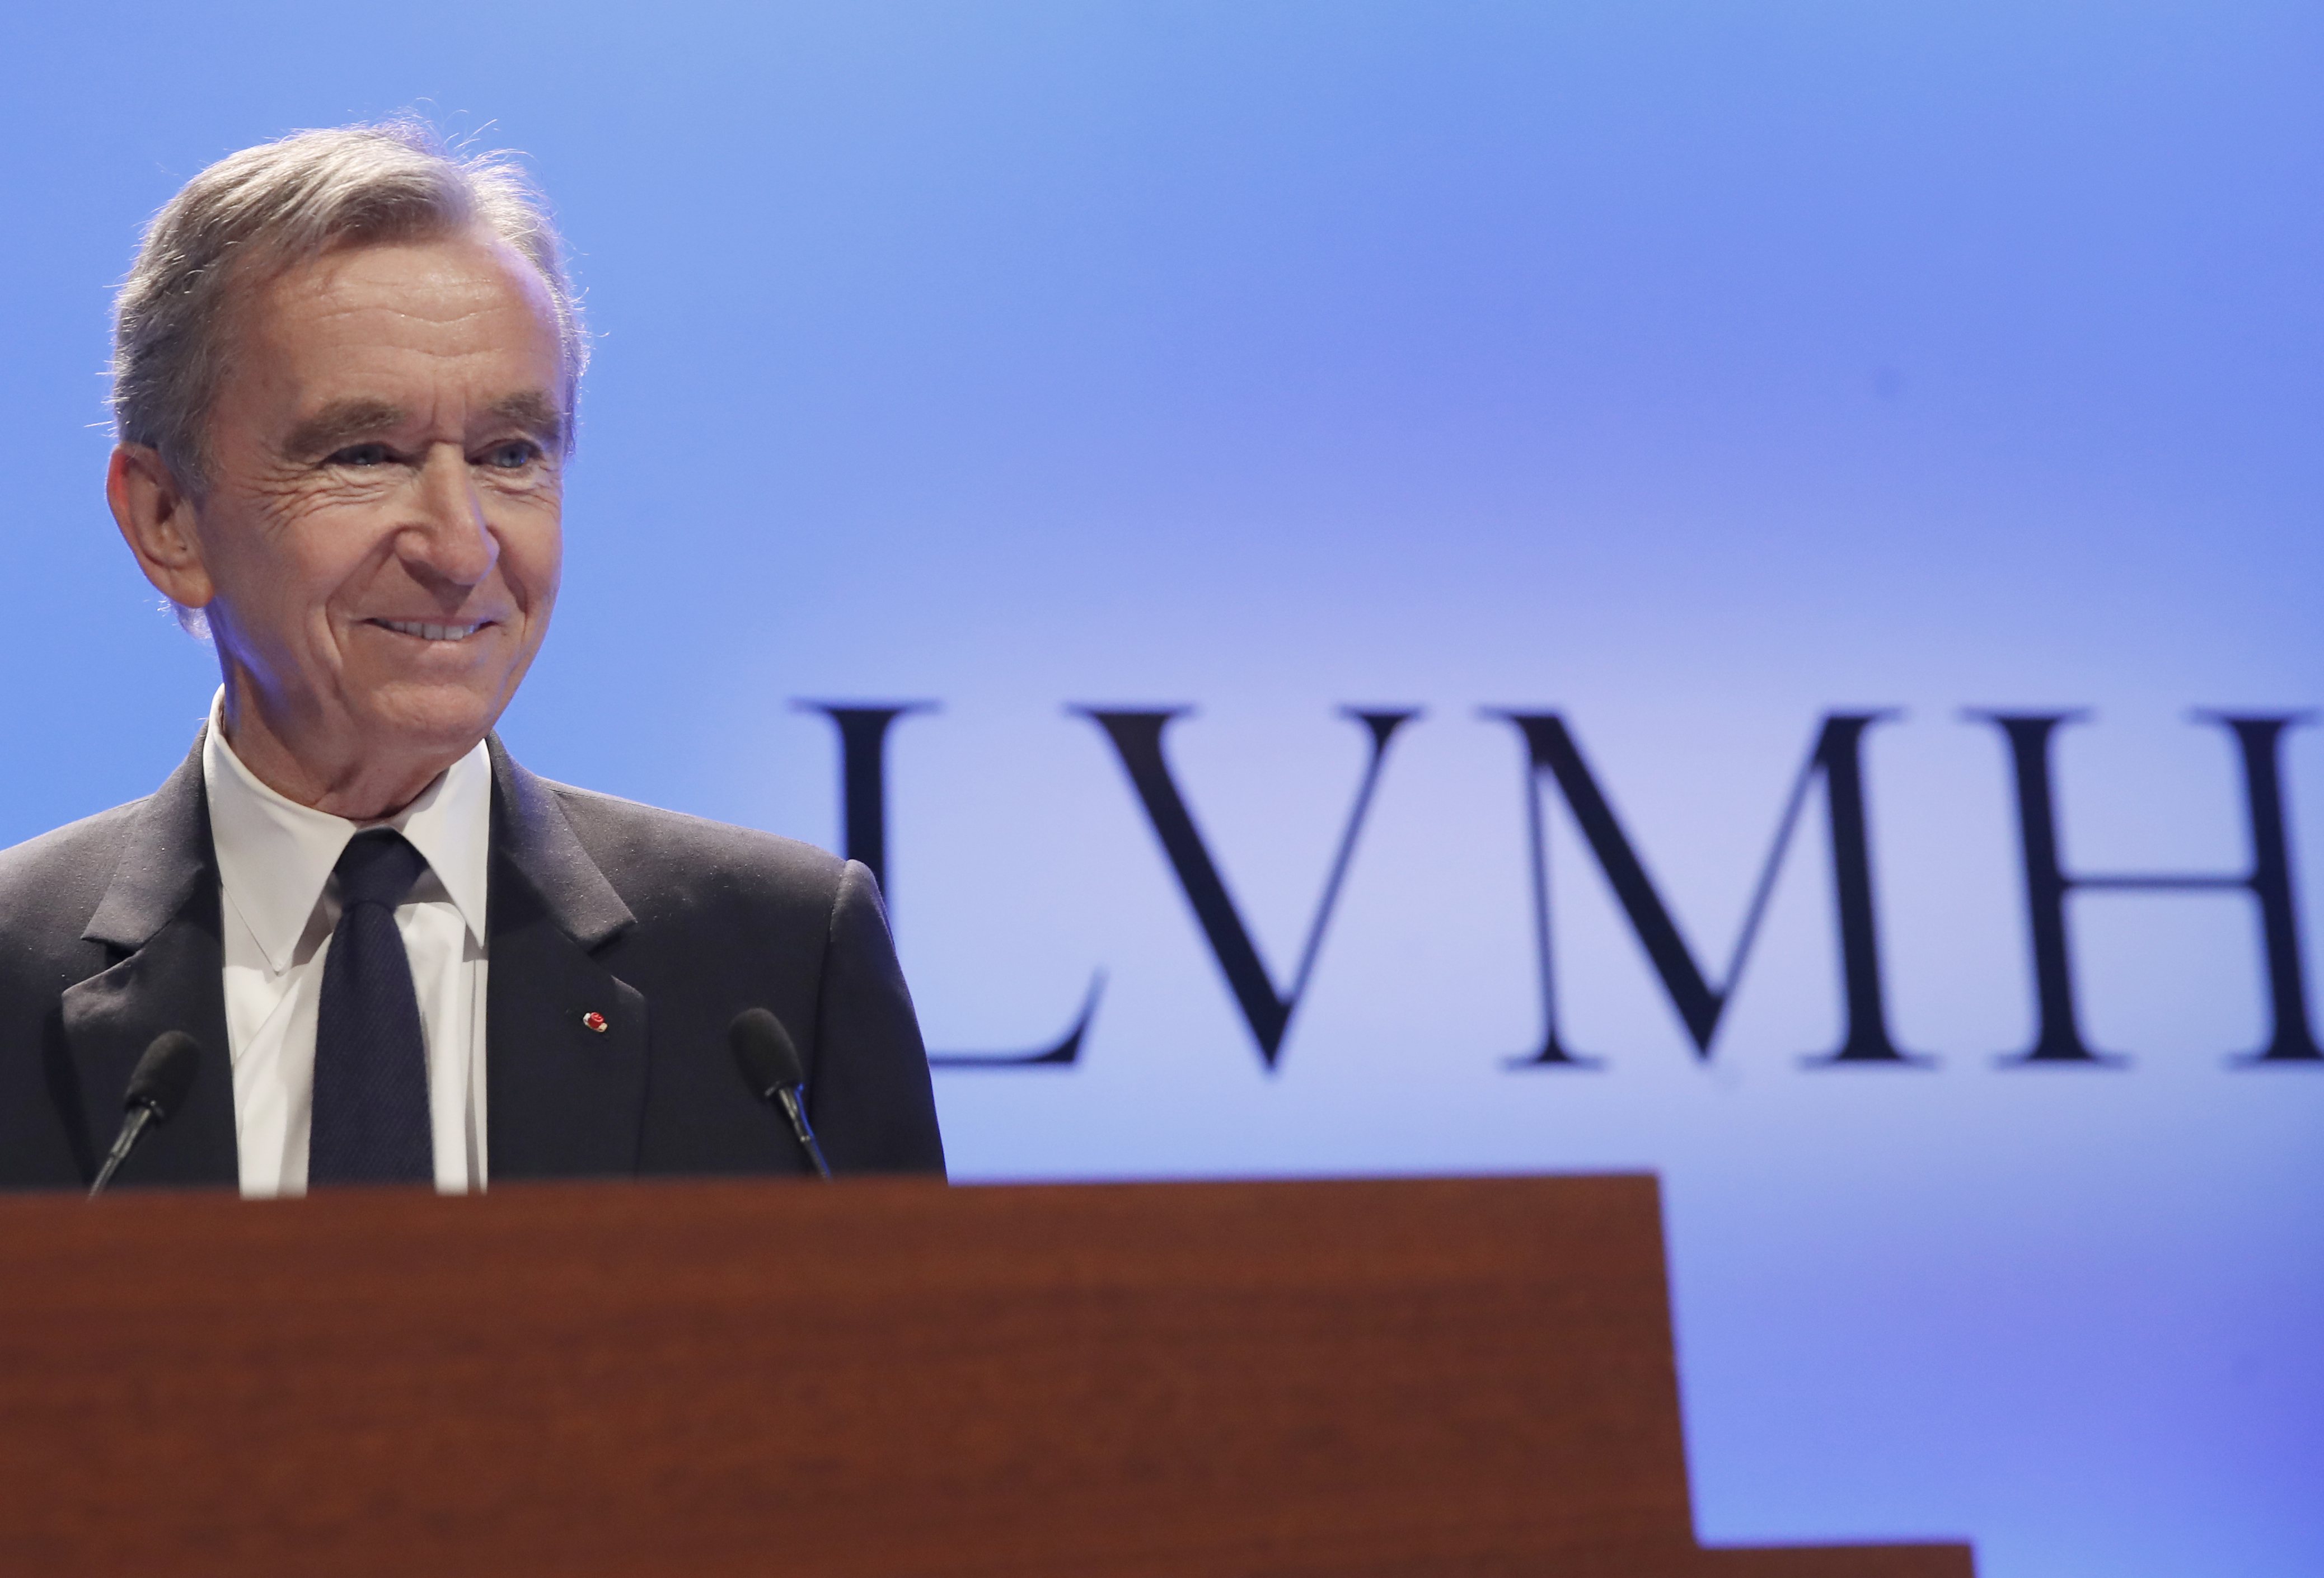 LVMH's CEO Is Now The Second Richest Man In The World